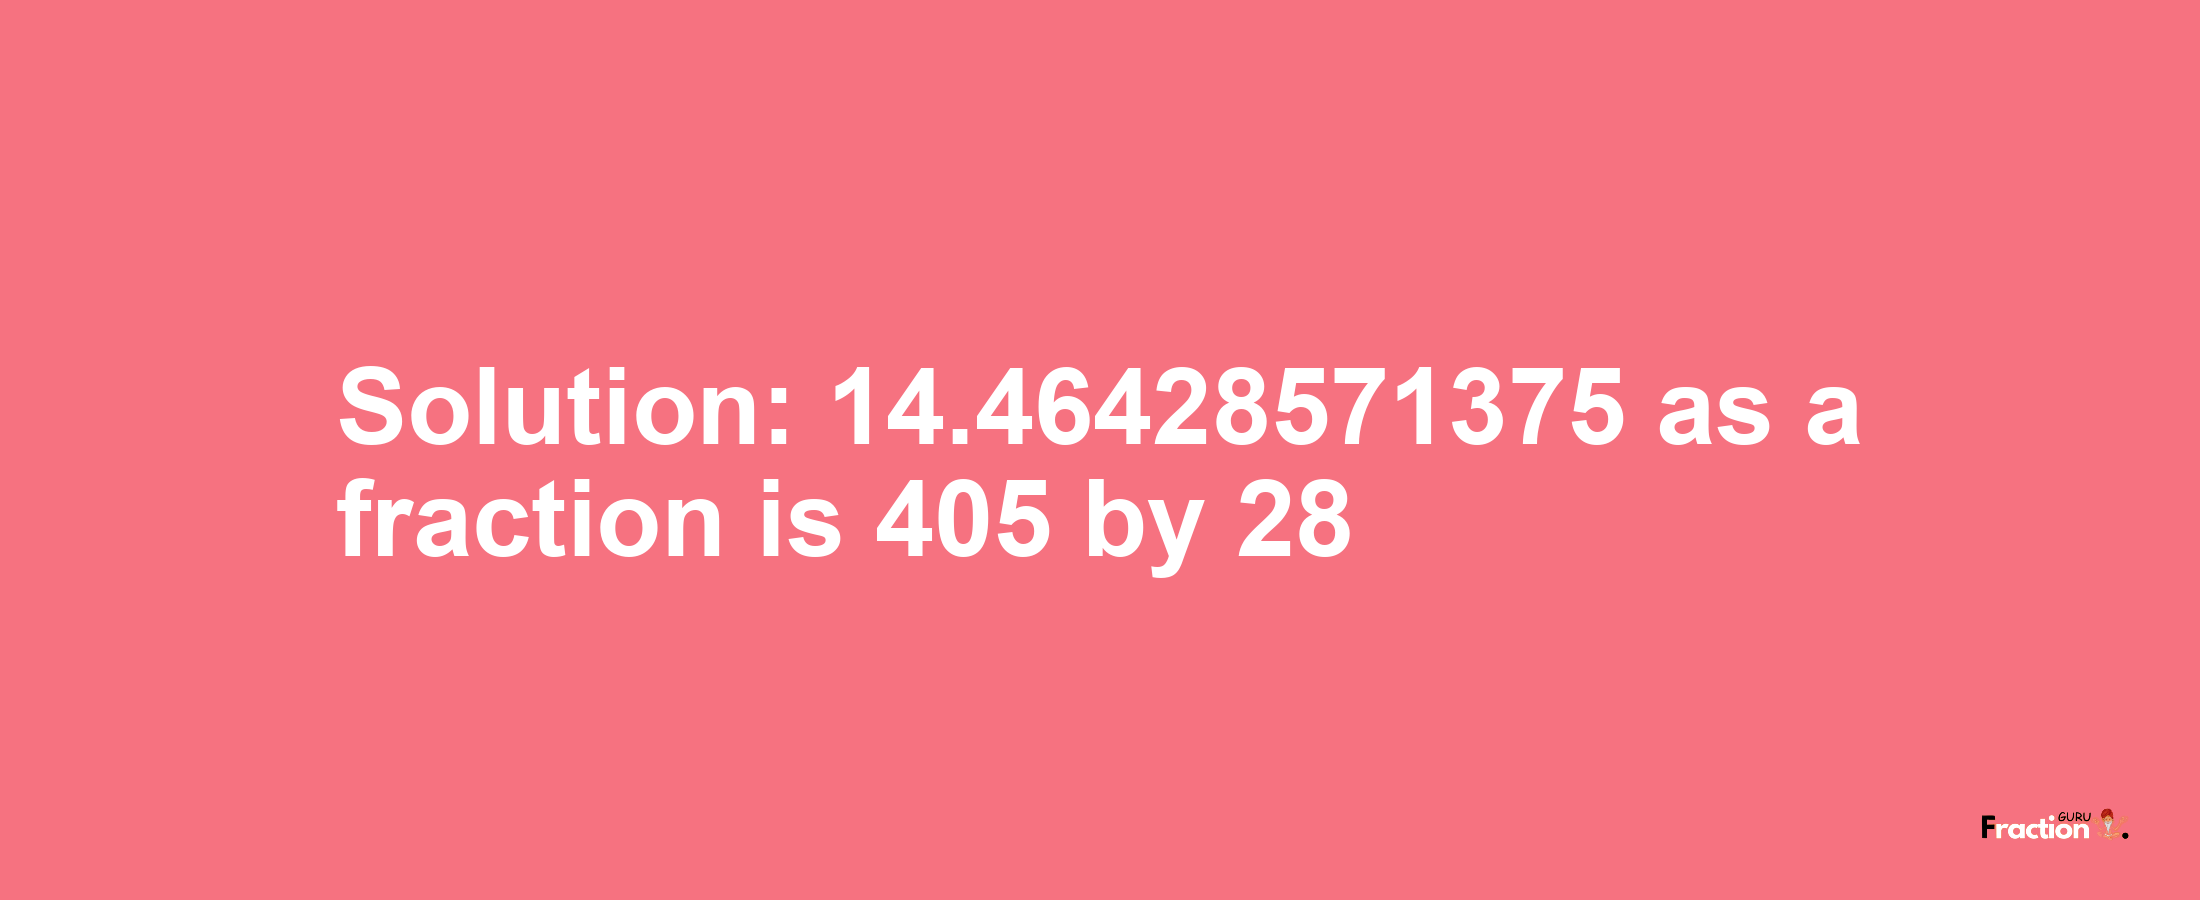 Solution:14.46428571375 as a fraction is 405/28